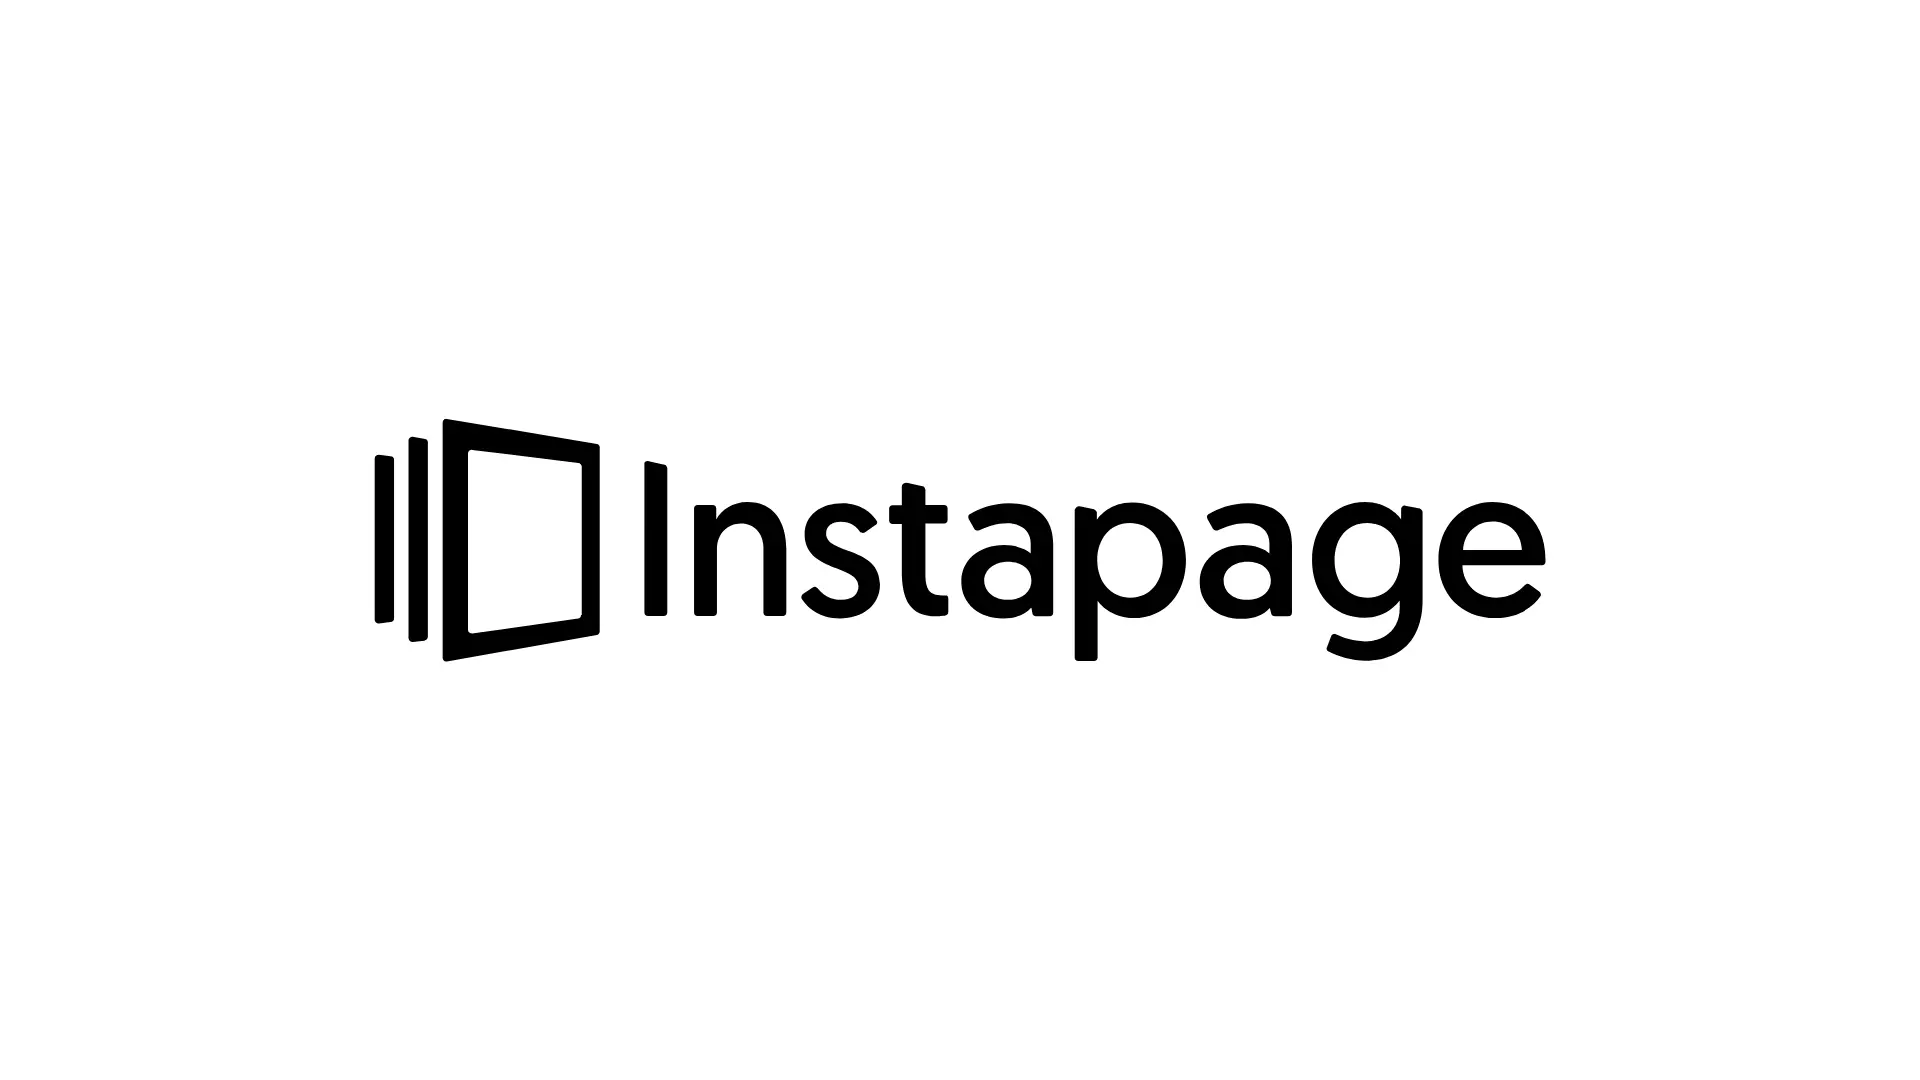 Instapage brand